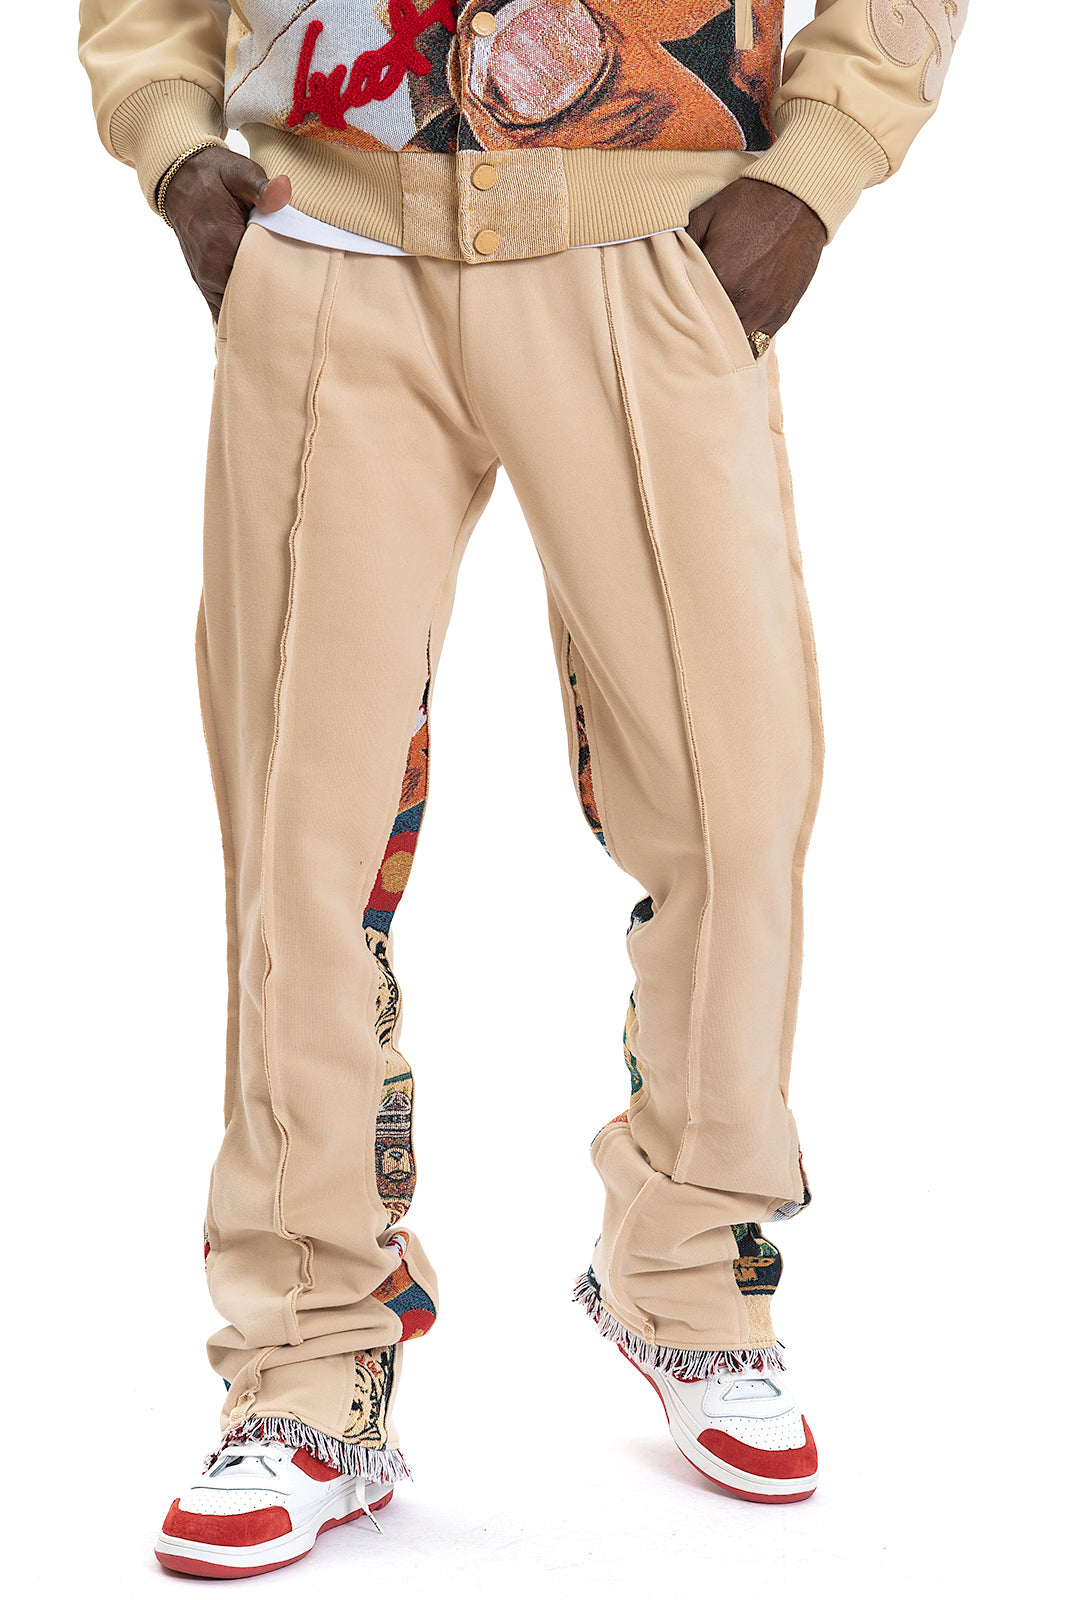 F1959 Frost Blow French Terry Pants - Khaki